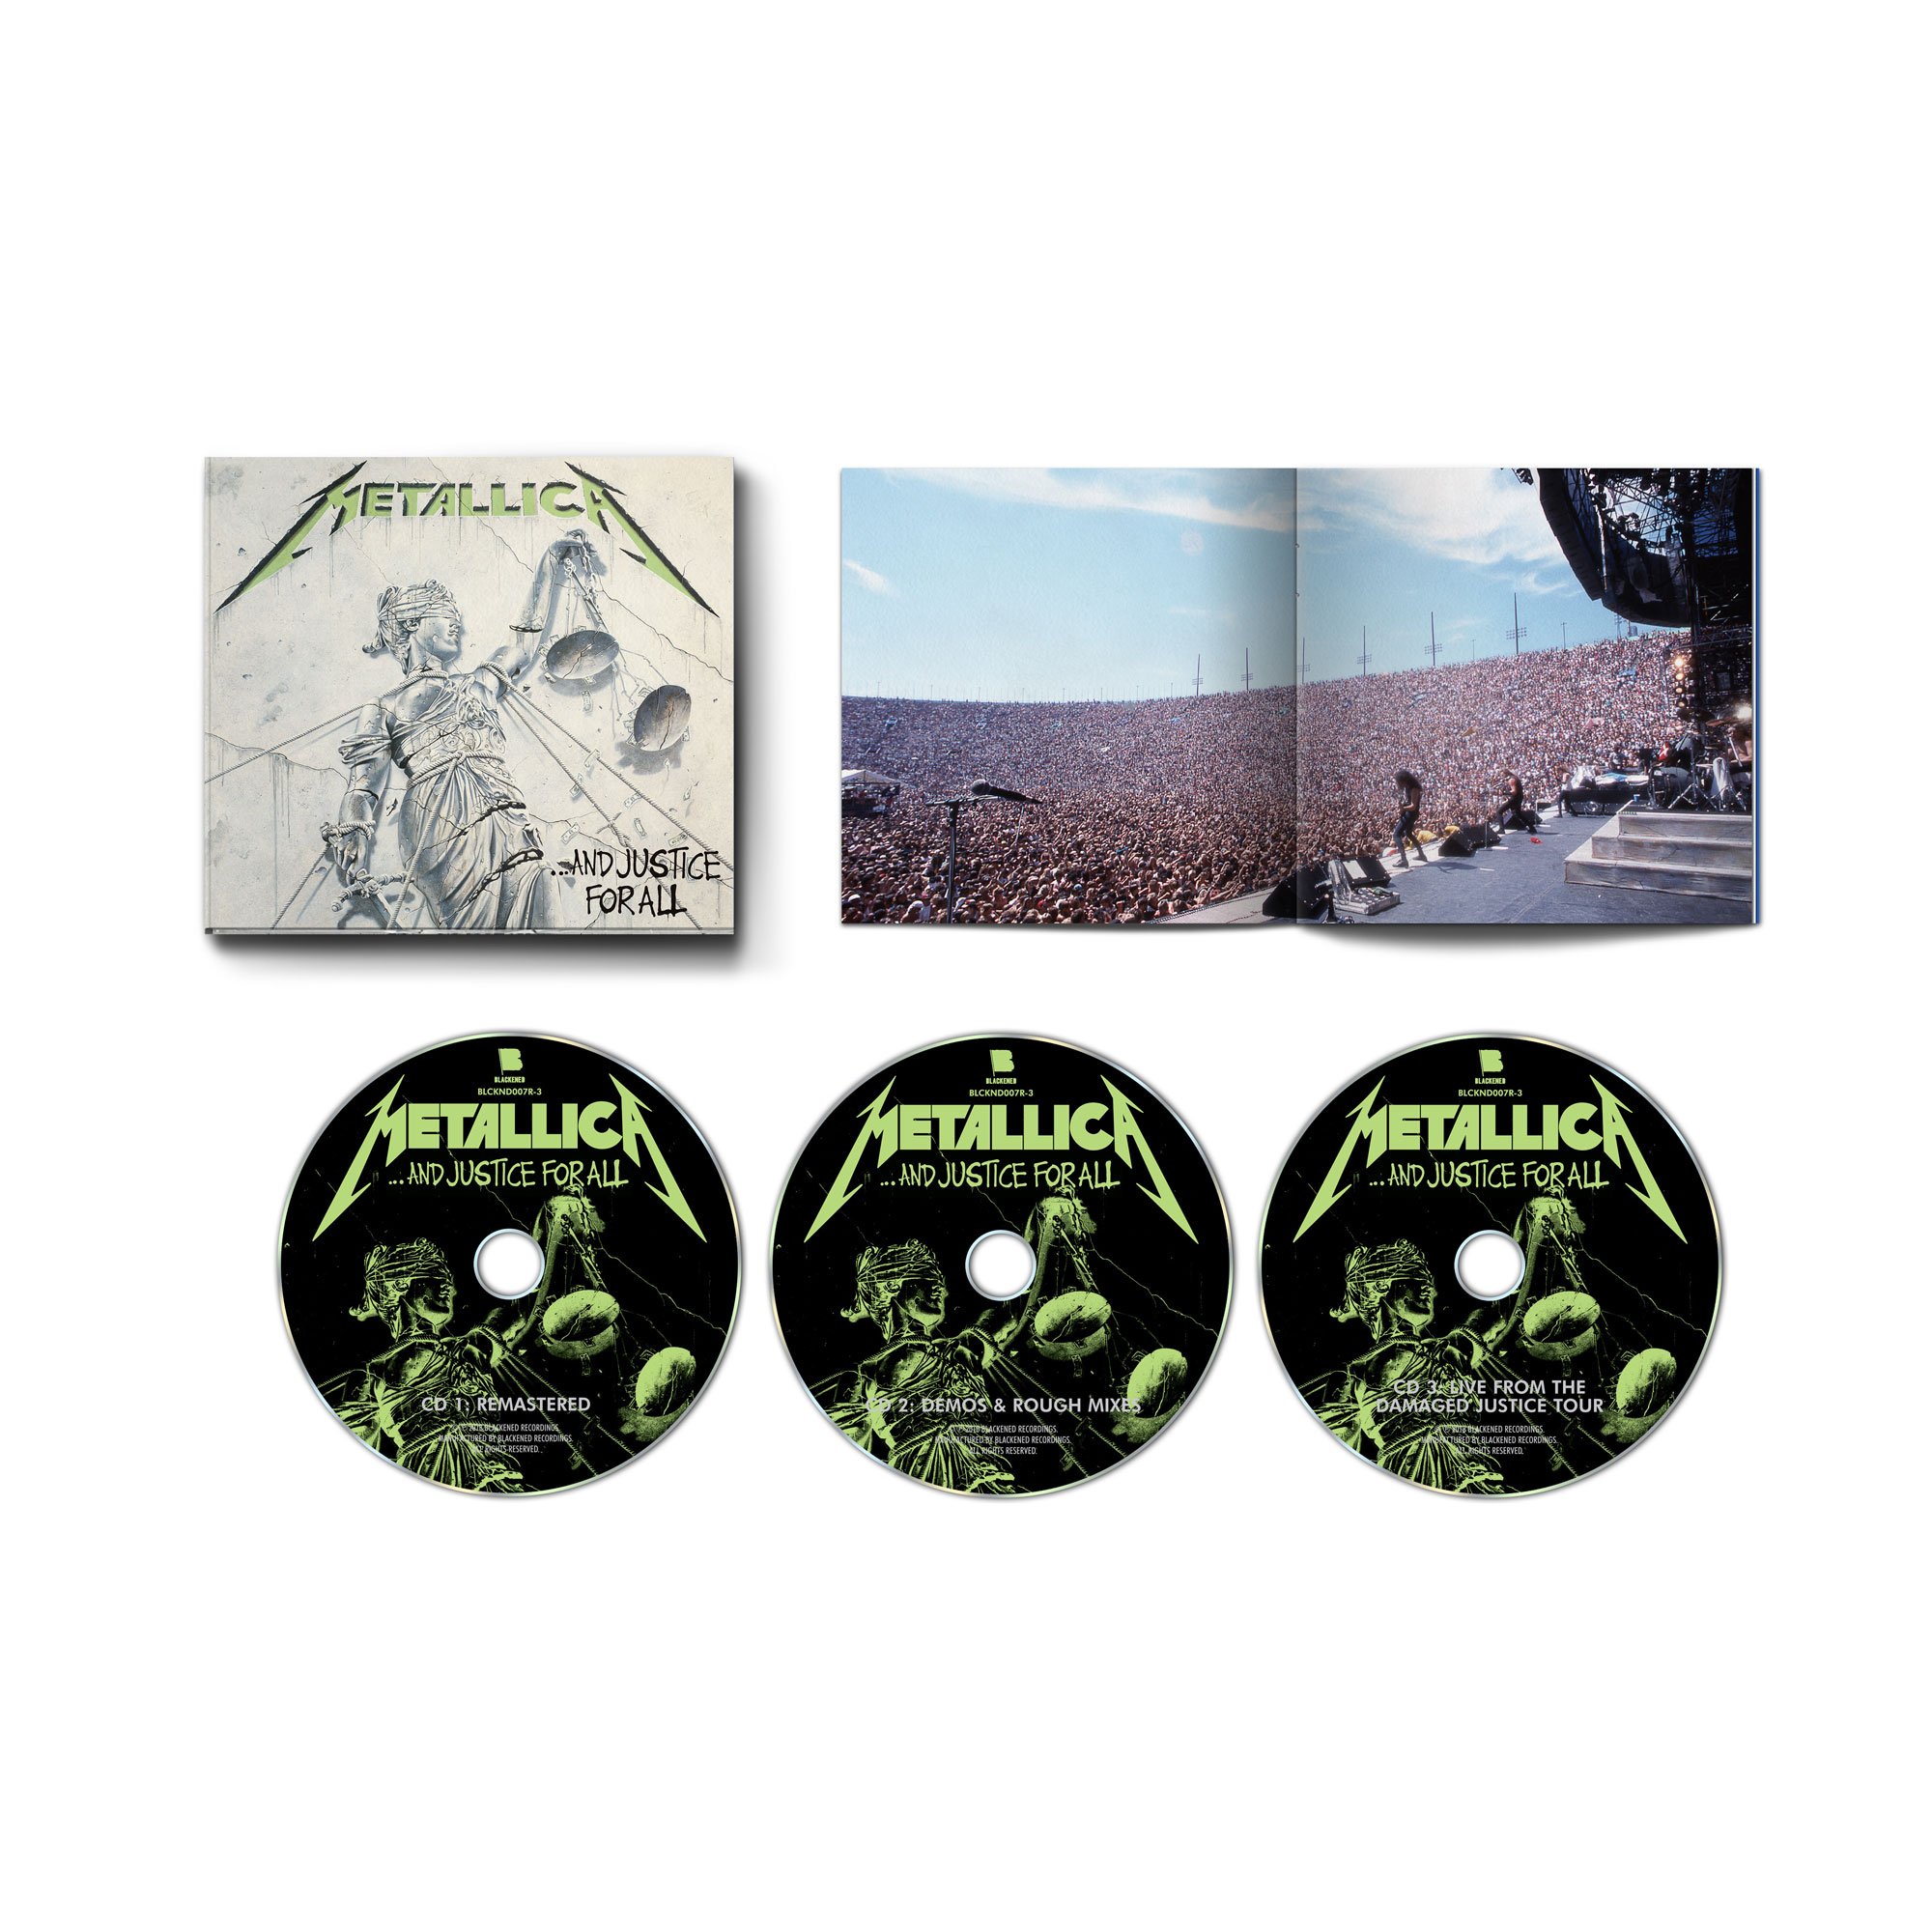 Borrowed grapes pupil And Justice For All (Remastered) - 3-CD Expanded Edition | Metallica.com |  Metallica.com